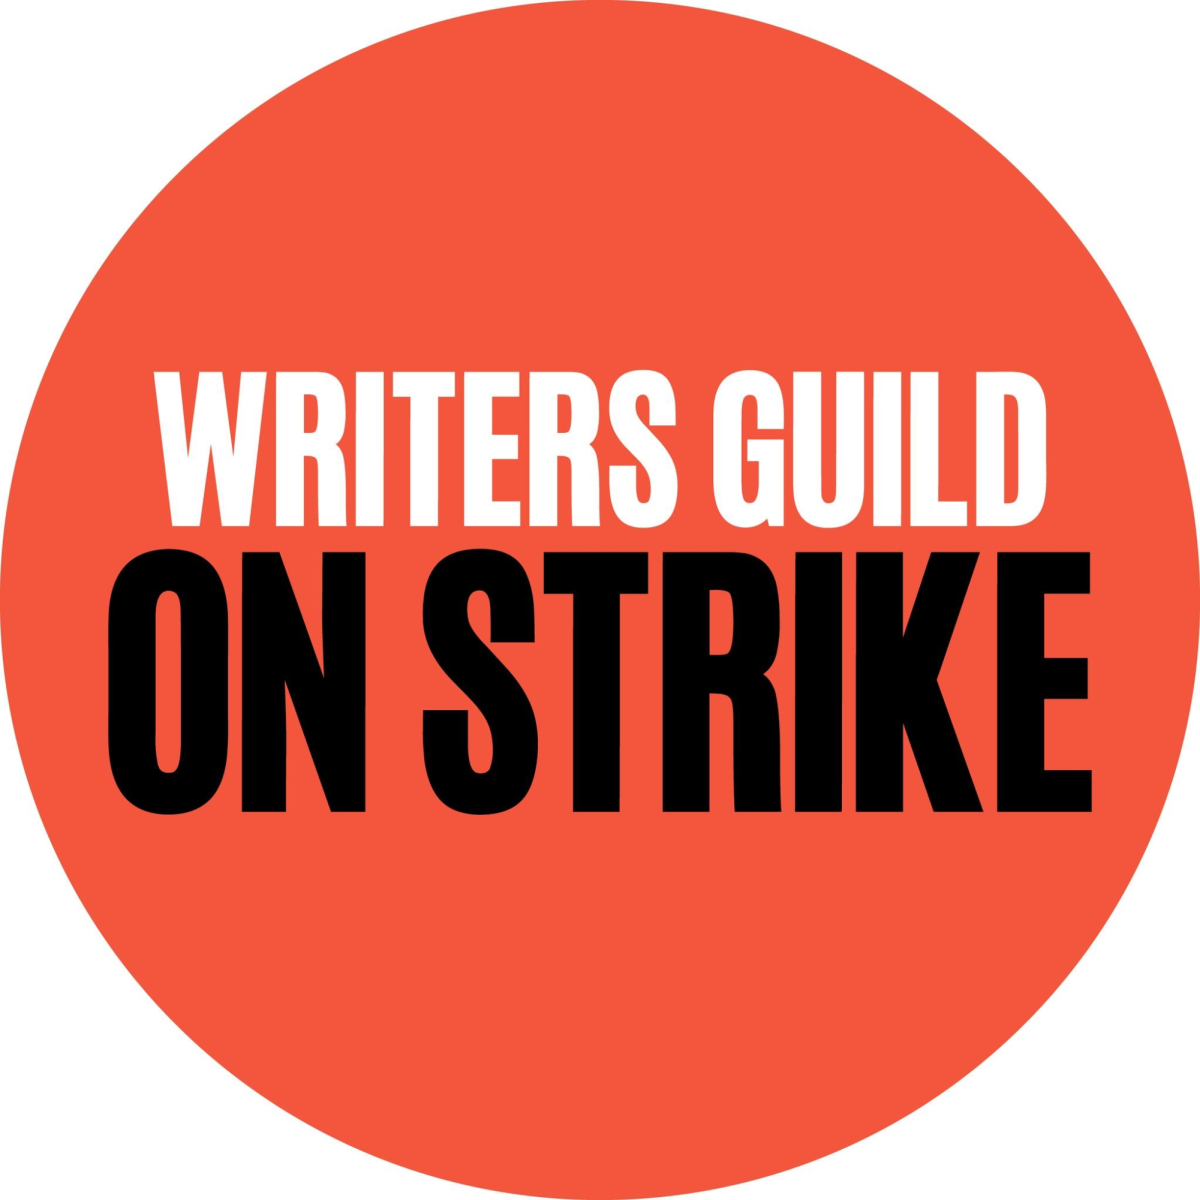 The WGA agreed to a tentative agreement after being on strike since May 2.